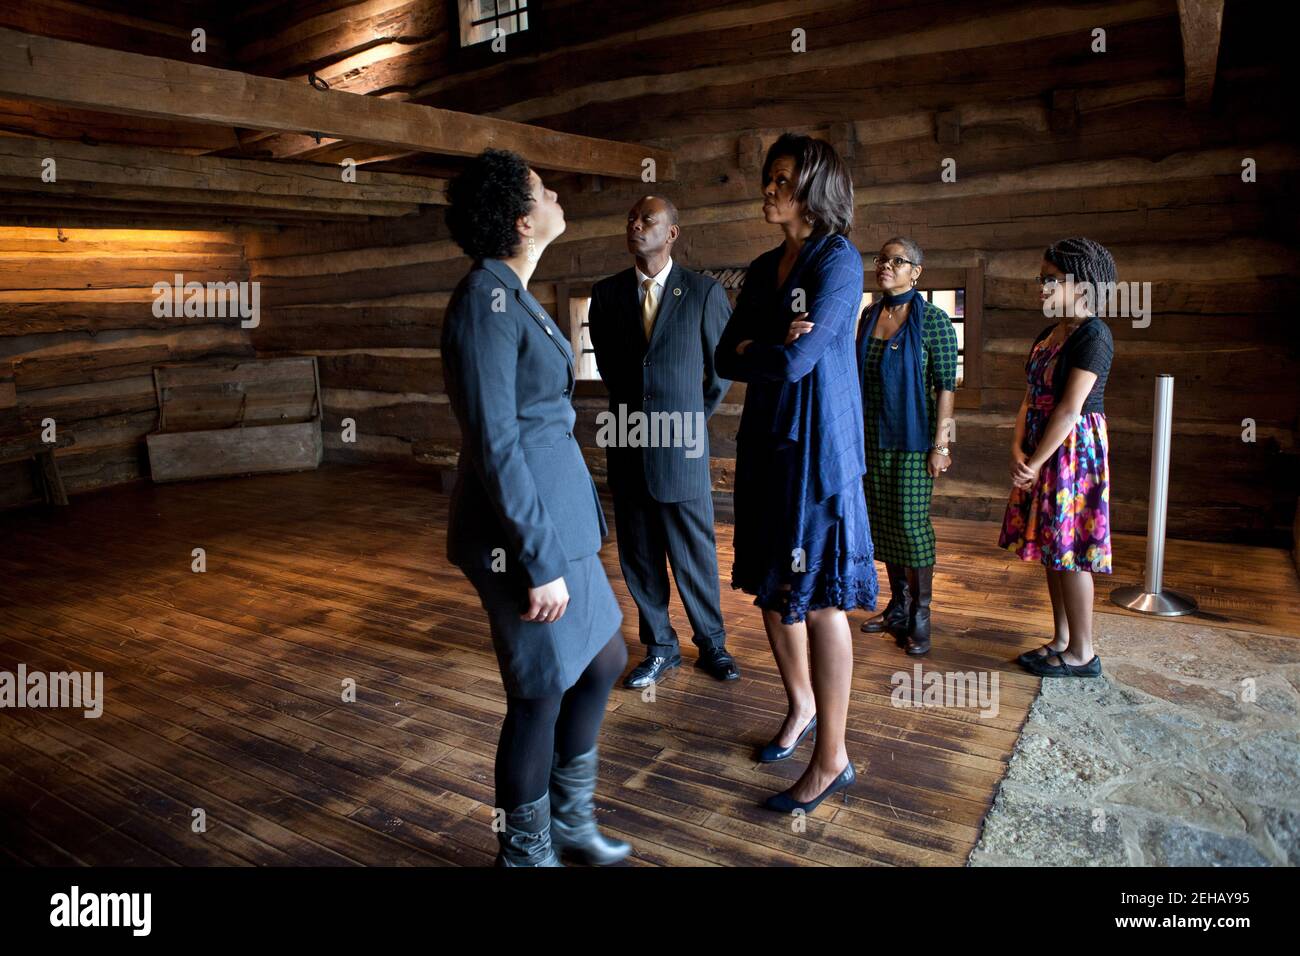 First Lady Michelle Obama views The Slave Pen exhibit while touring the National Underground Railroad Freedom Center in Cincinnati, Ohio, Feb. 23, 2012. Pictured, from left, are: Dina Bailey, Associate Curator of the National Underground Railroad Freedom Center; Cincinnati Mayor Mark Mallory; Verna Williams; and Allison Singleton. Stock Photo